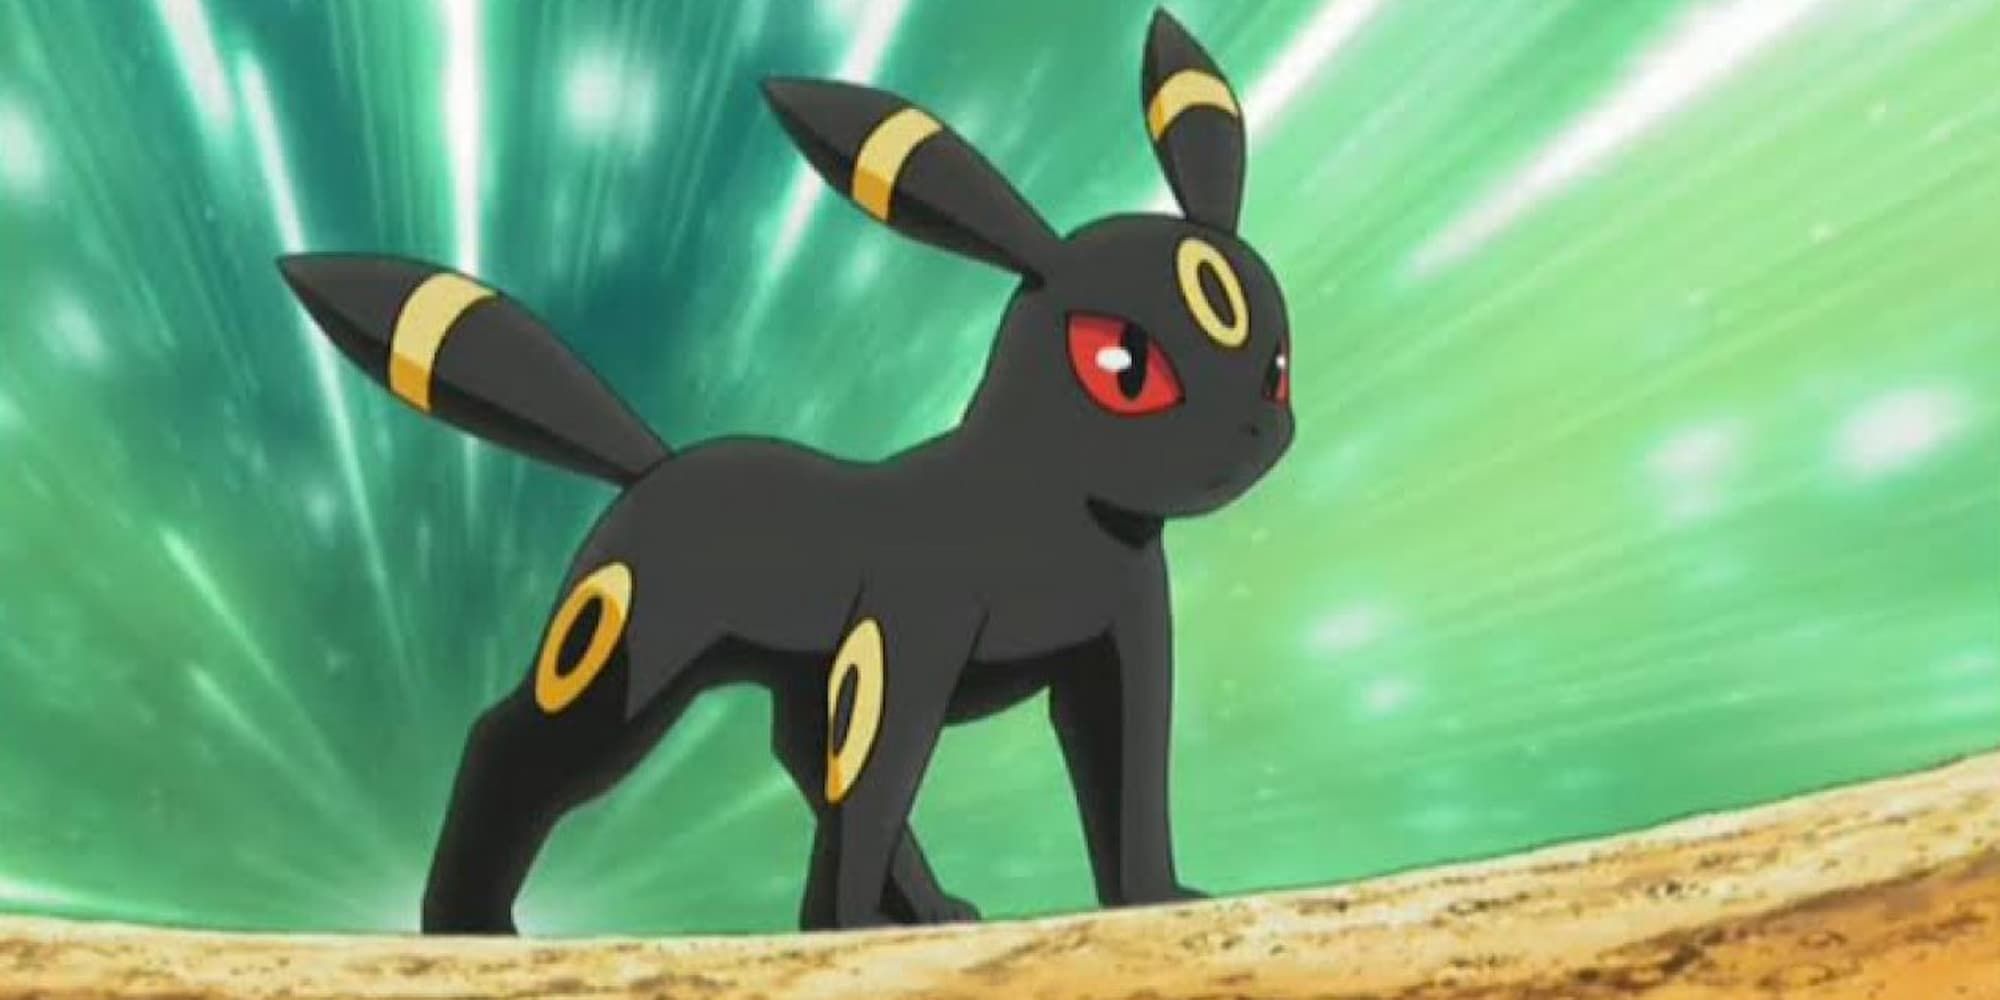 Umbreon stands on its four legs ready to battle.